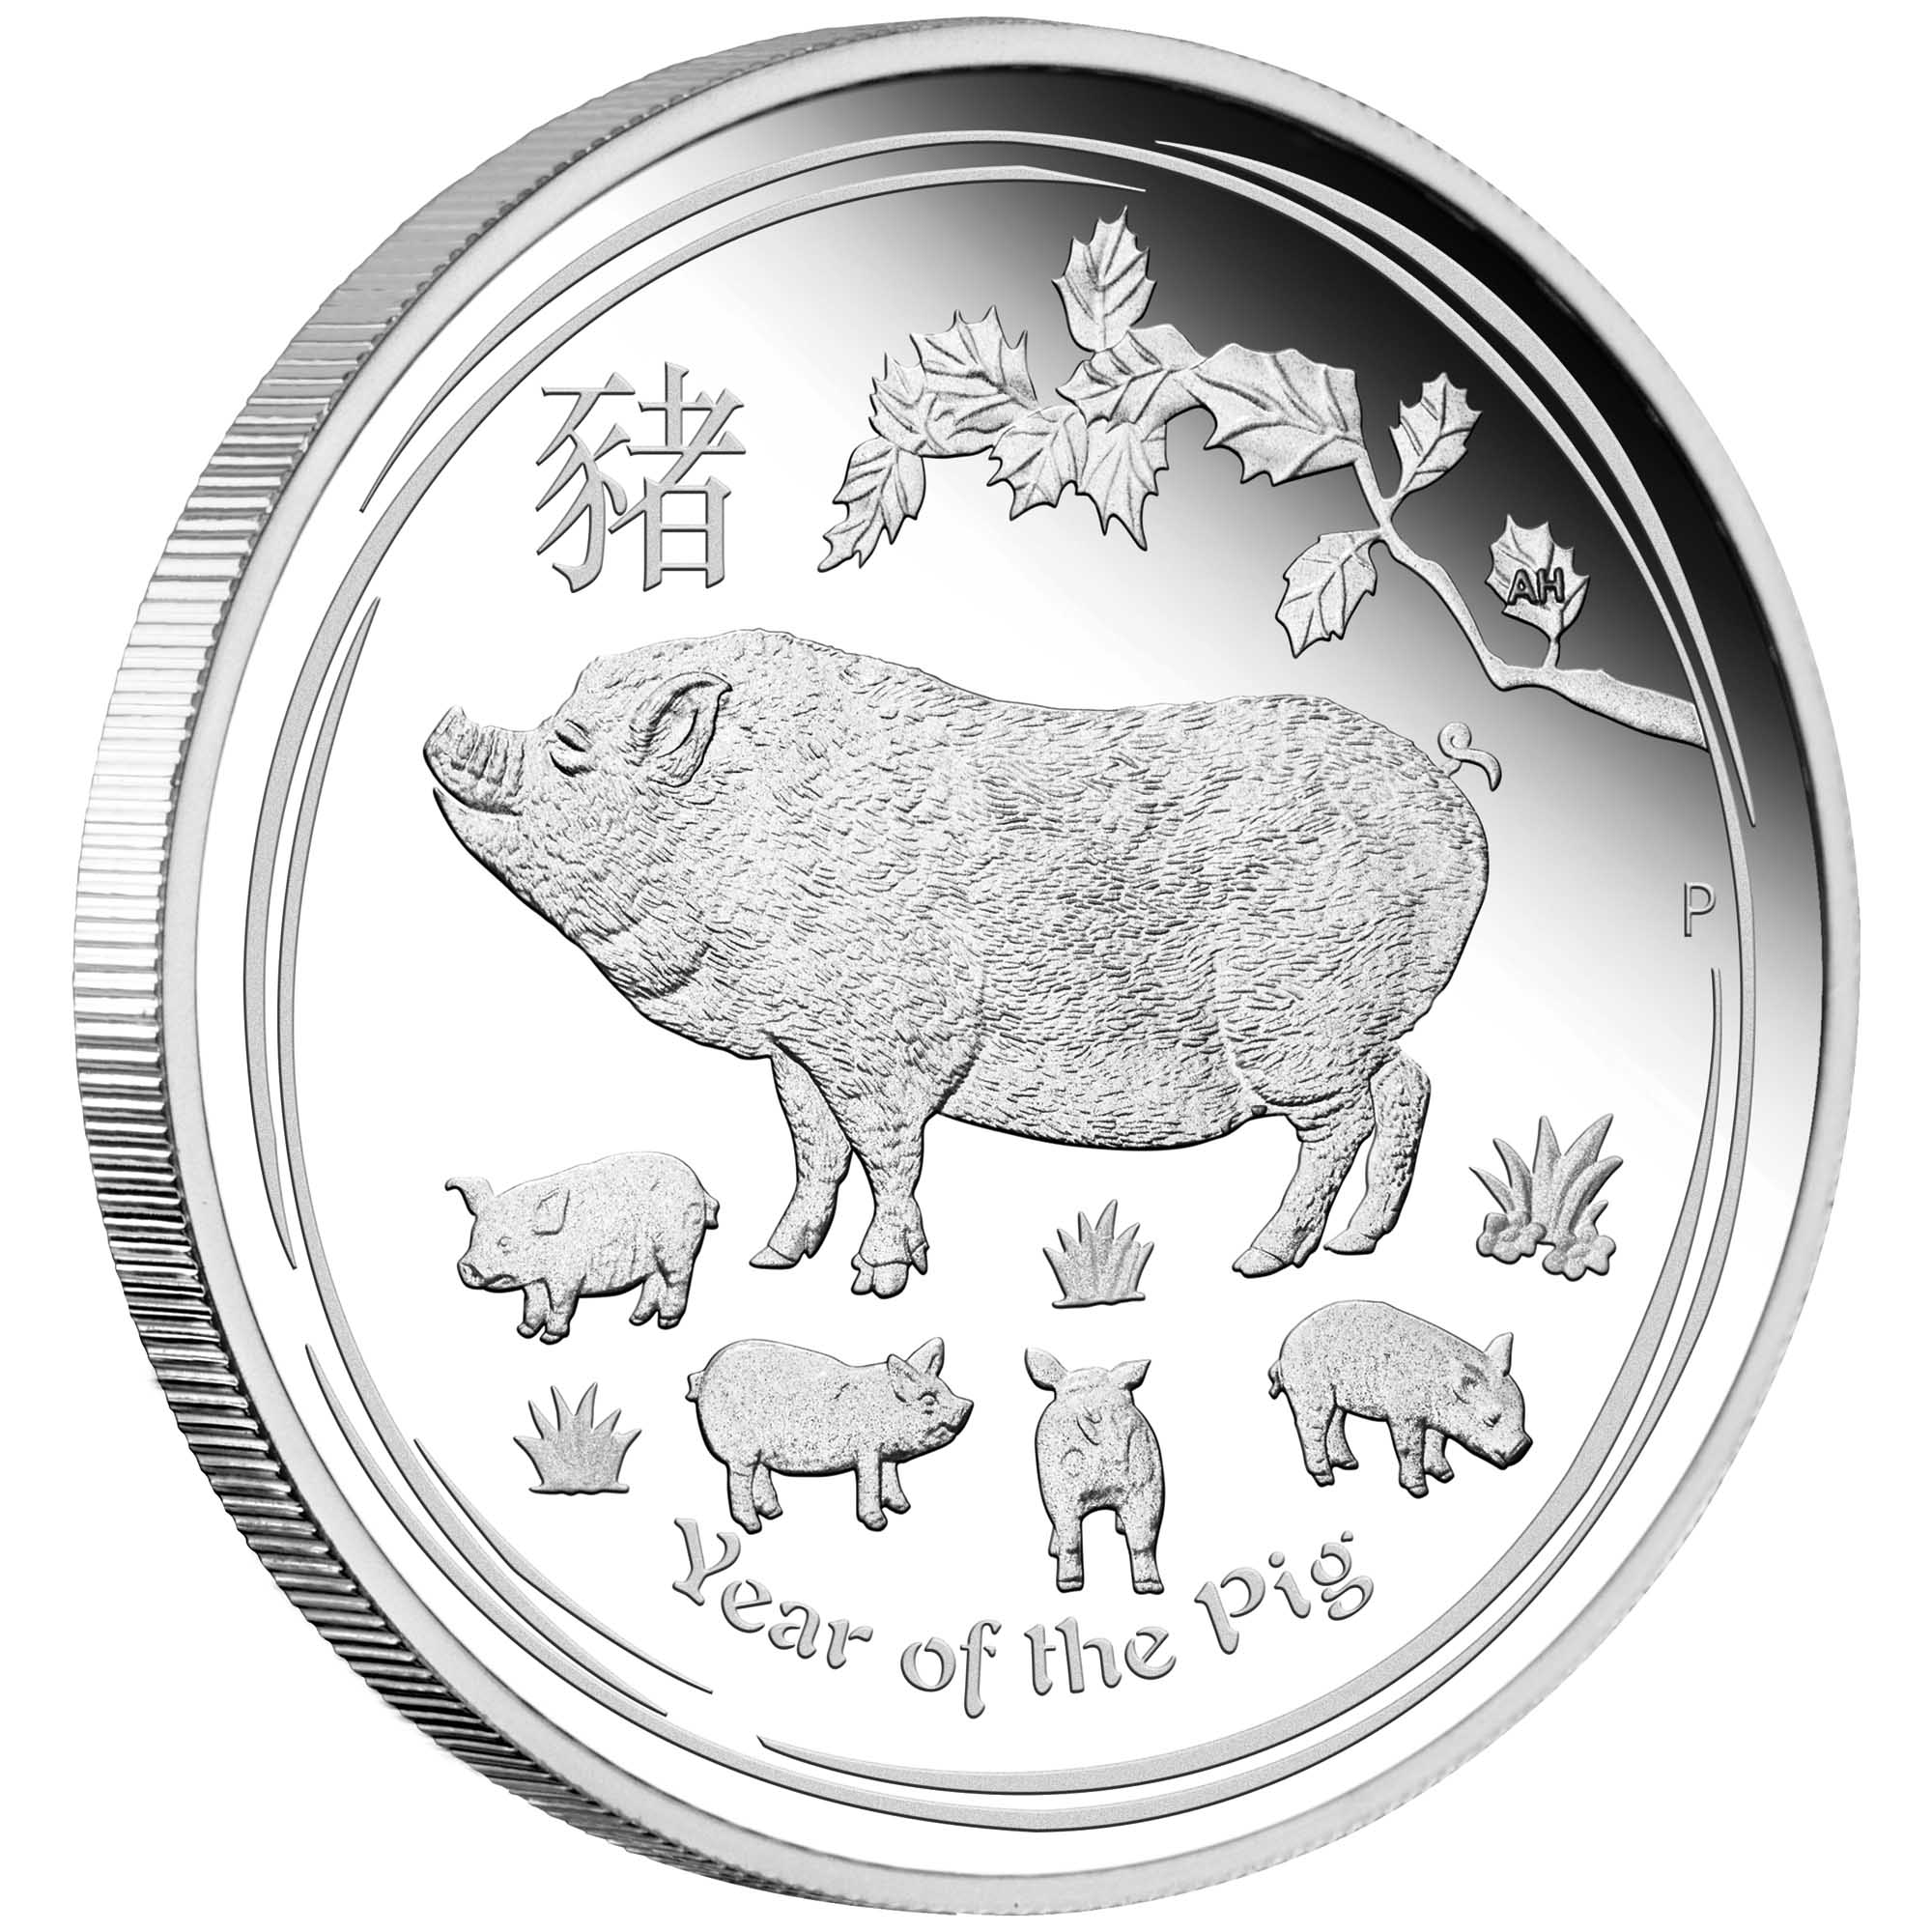 PERTH AUSTRALIA LUNAR YEAR OF THE PIG 2019 2 OZ PURE SILVER COLOR COIN CAPSULE 